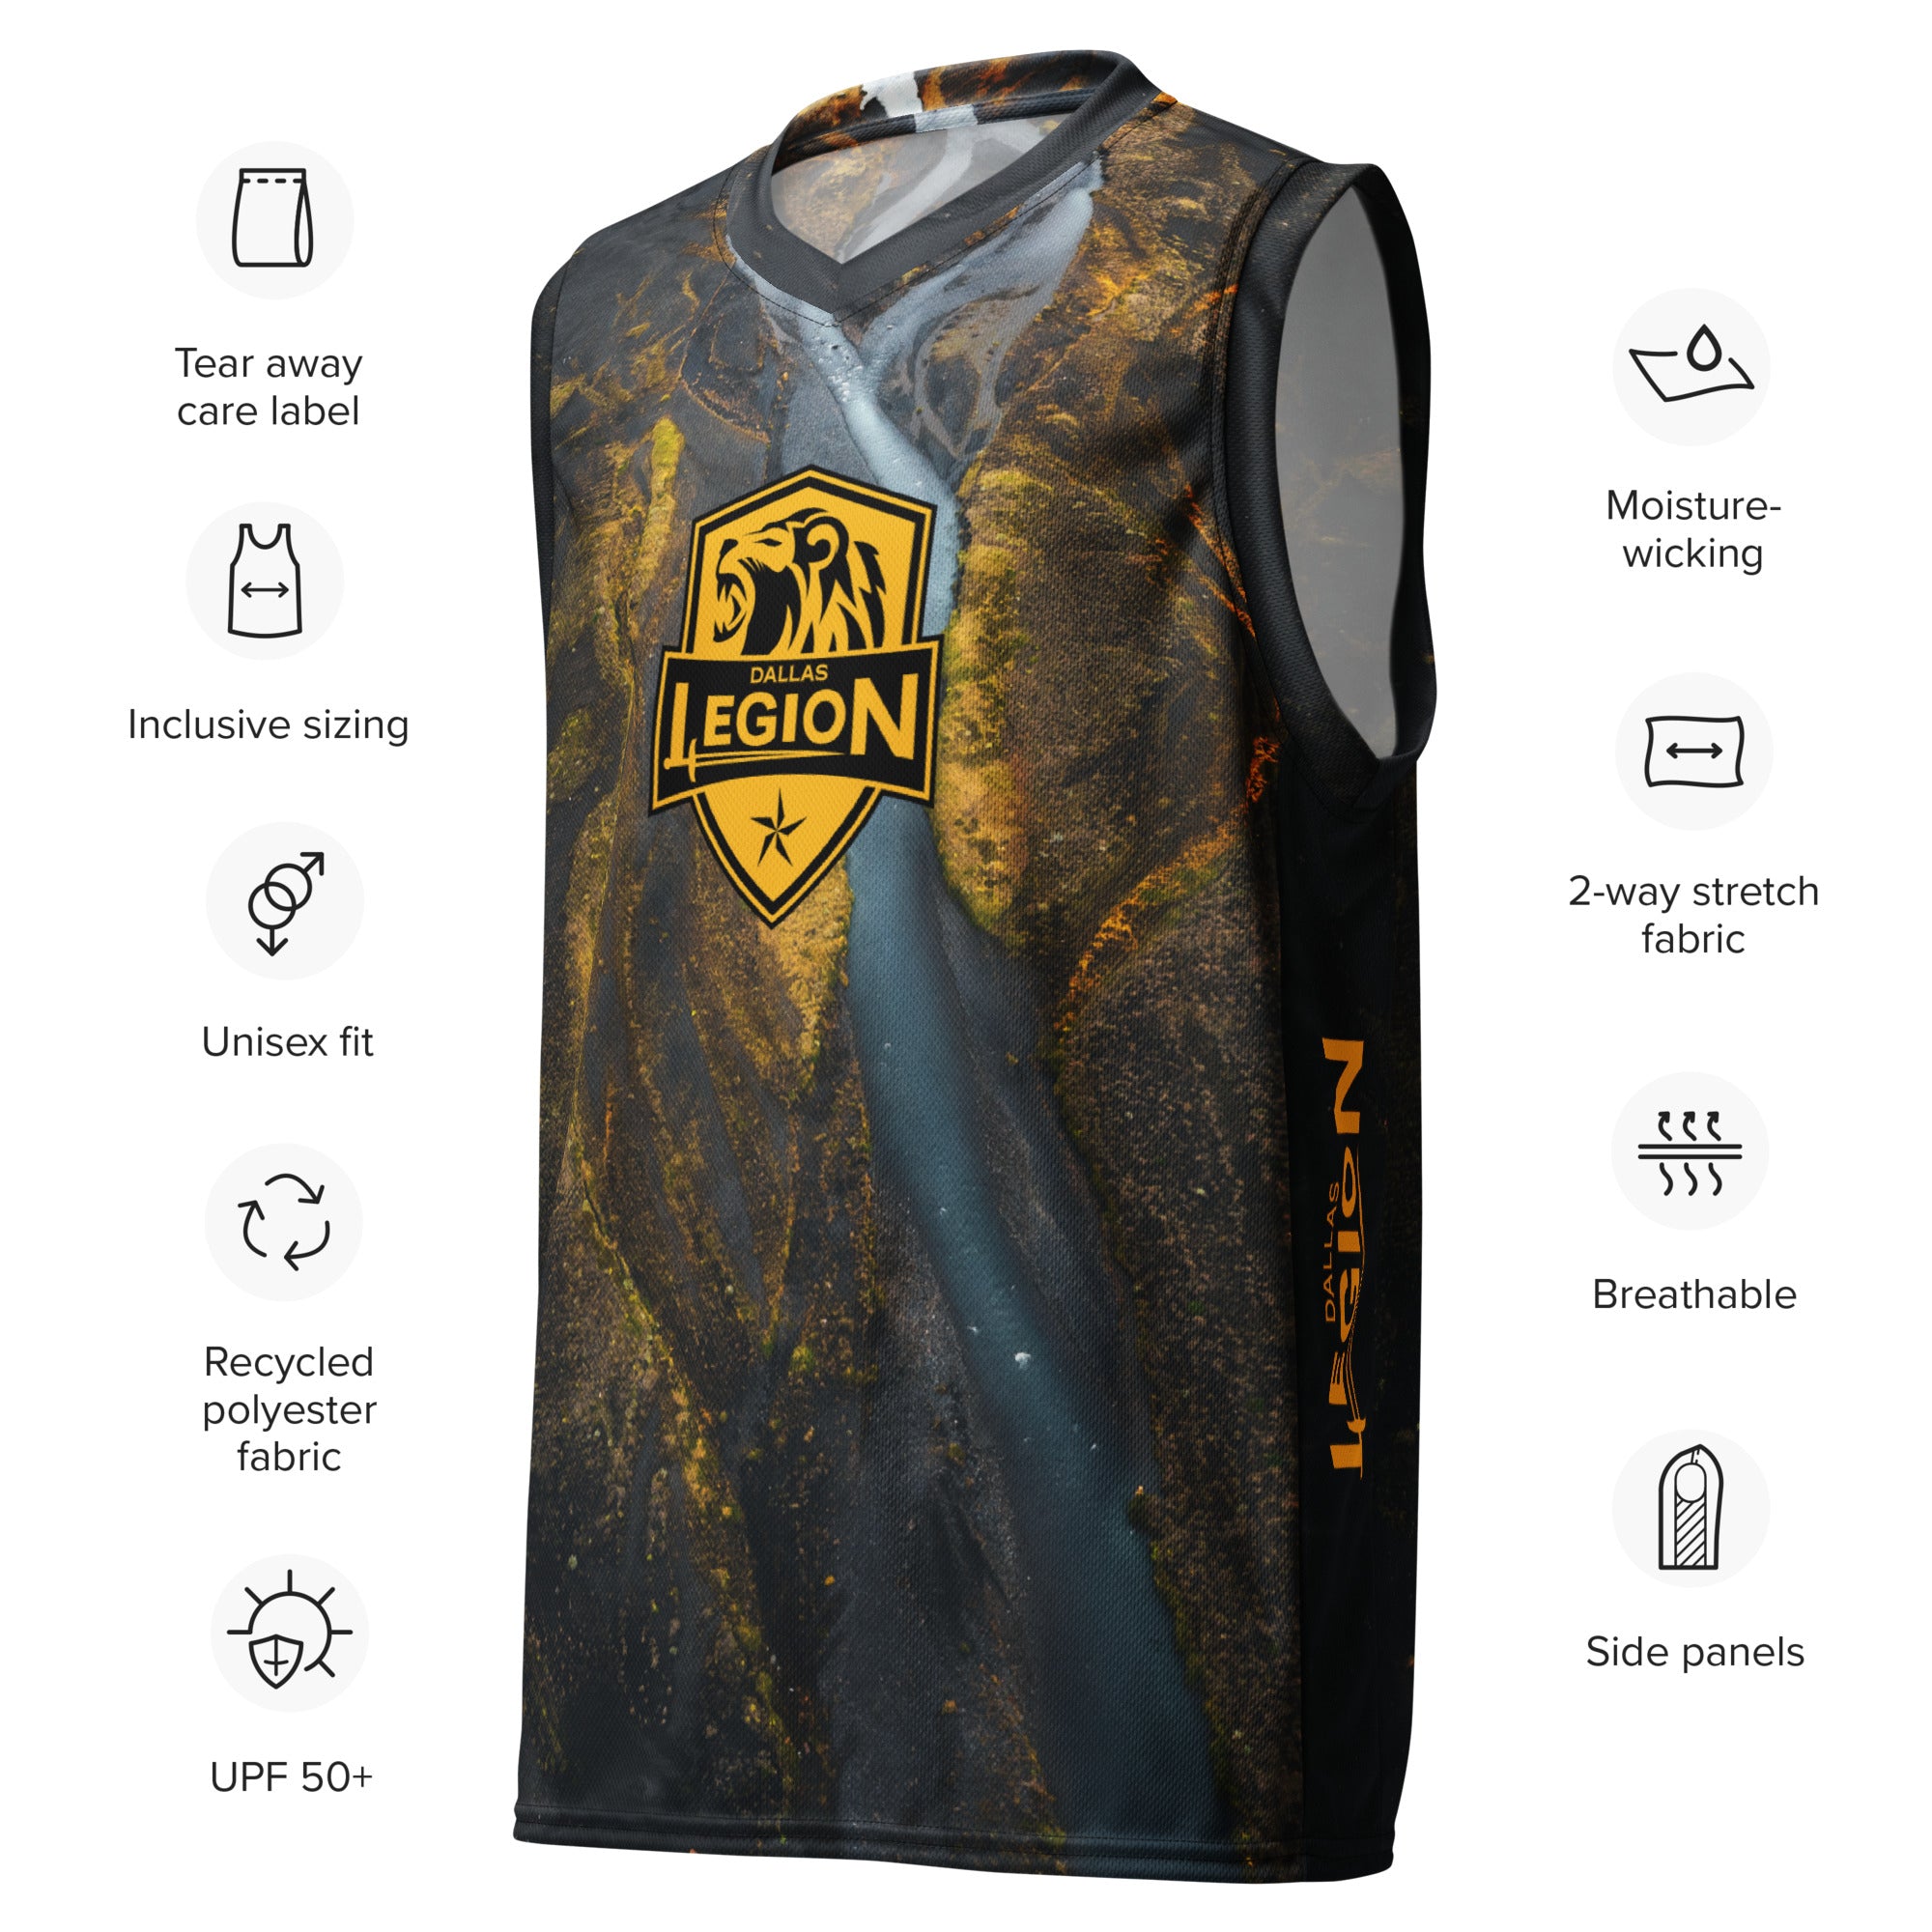 Recycled unisex basketball jersey - Star River